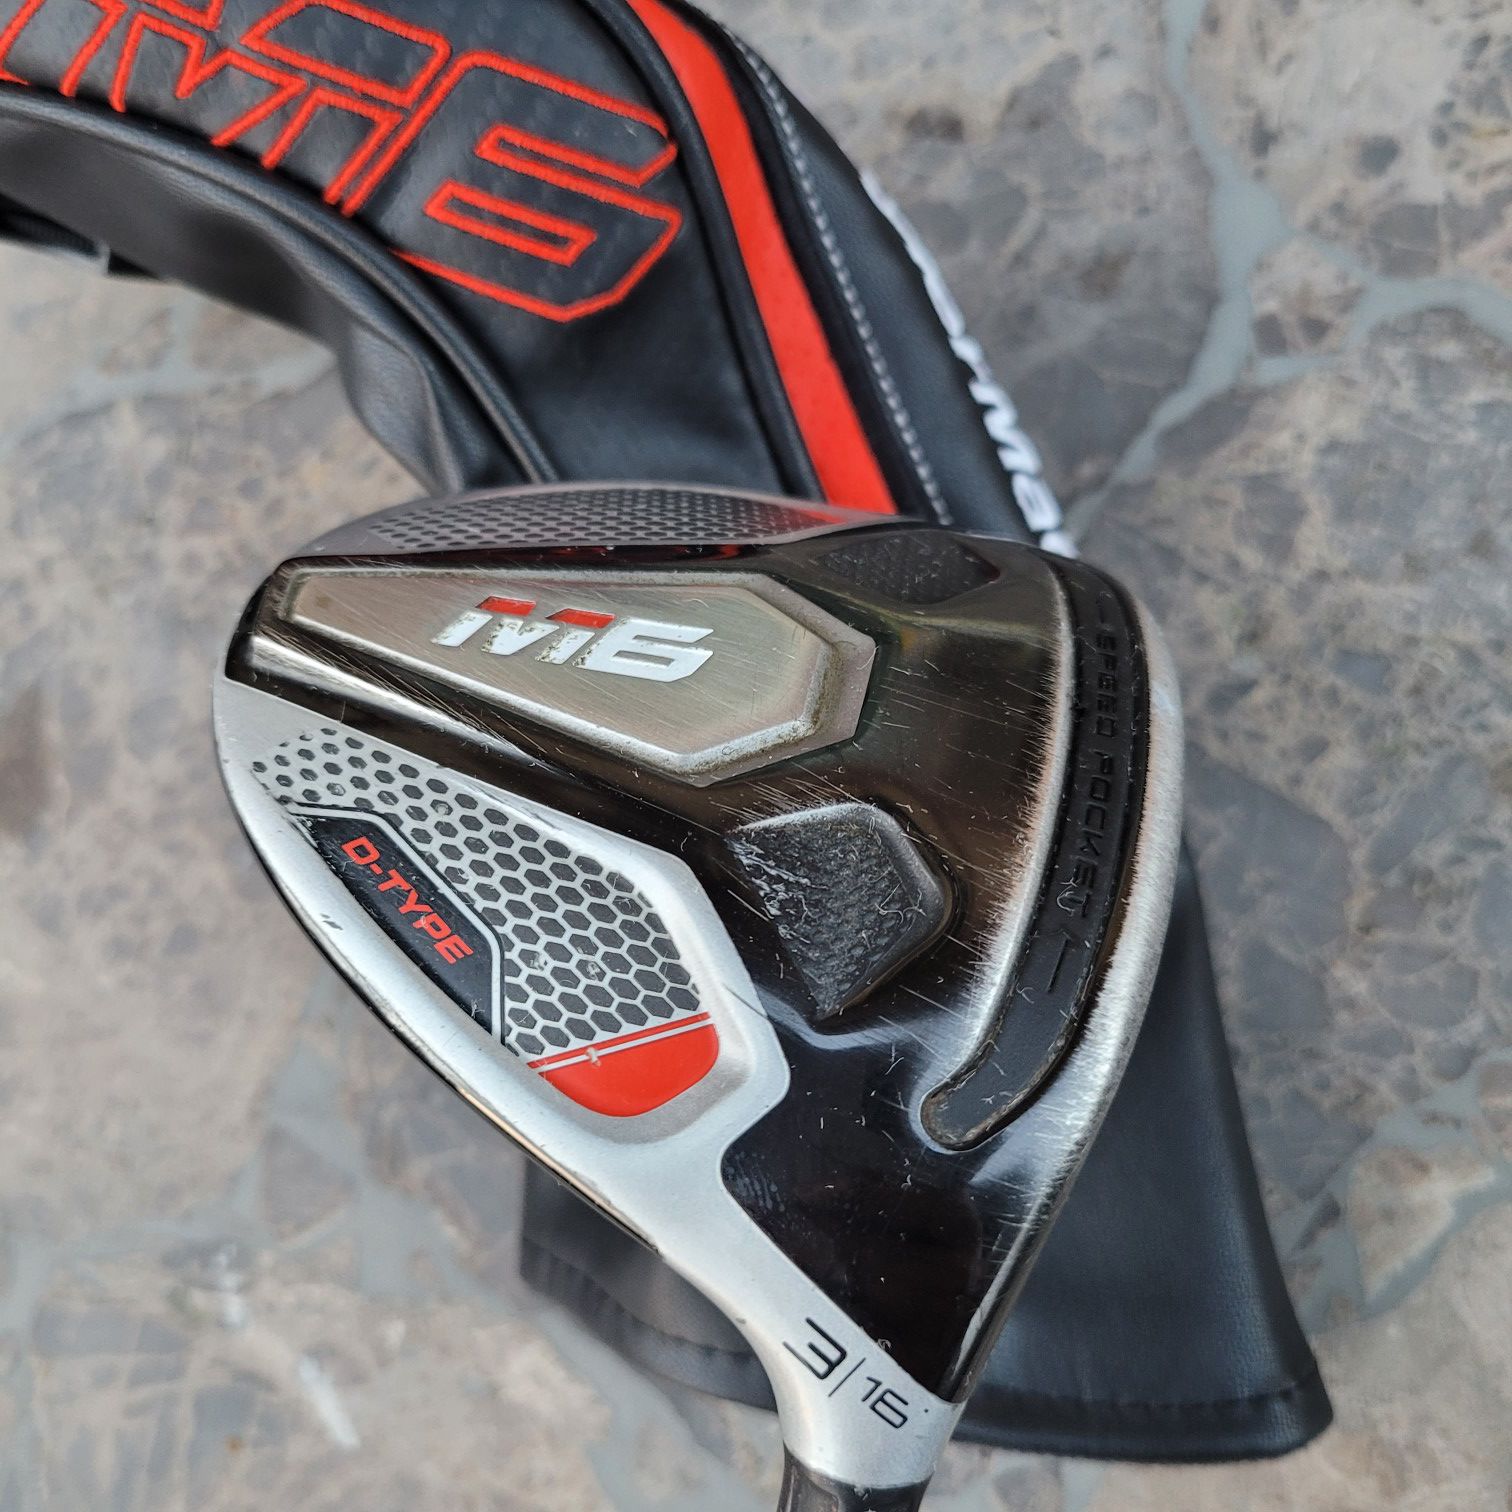 TaylorMade M6 3 wood 16° D type